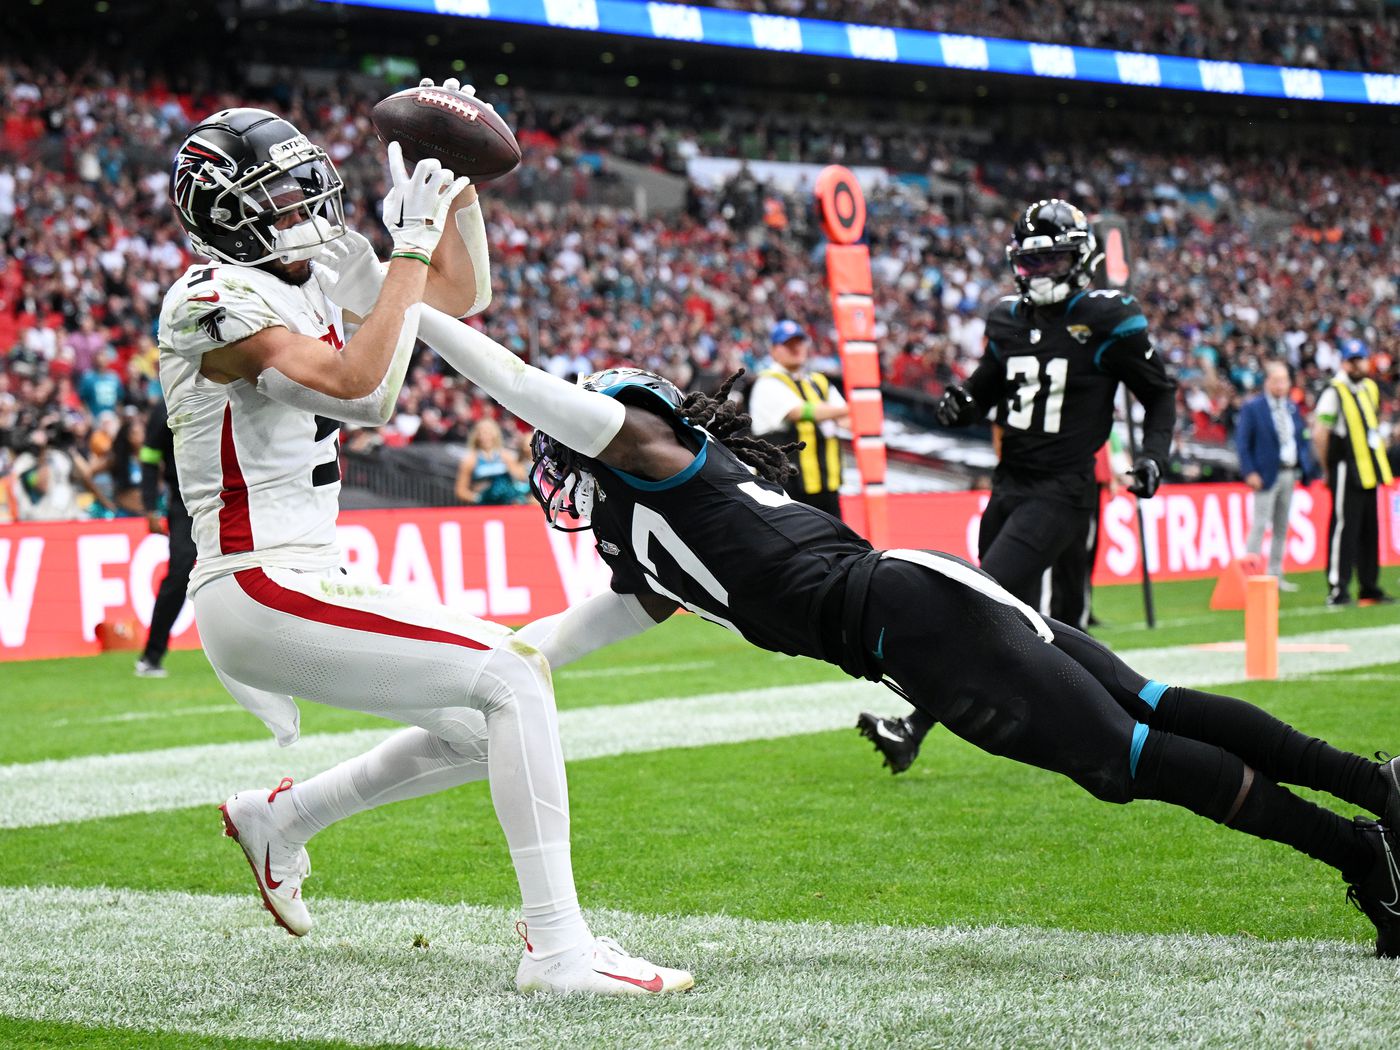 Lawrence, Ridley and defense help Jaguars beat Falcons 23-7 in